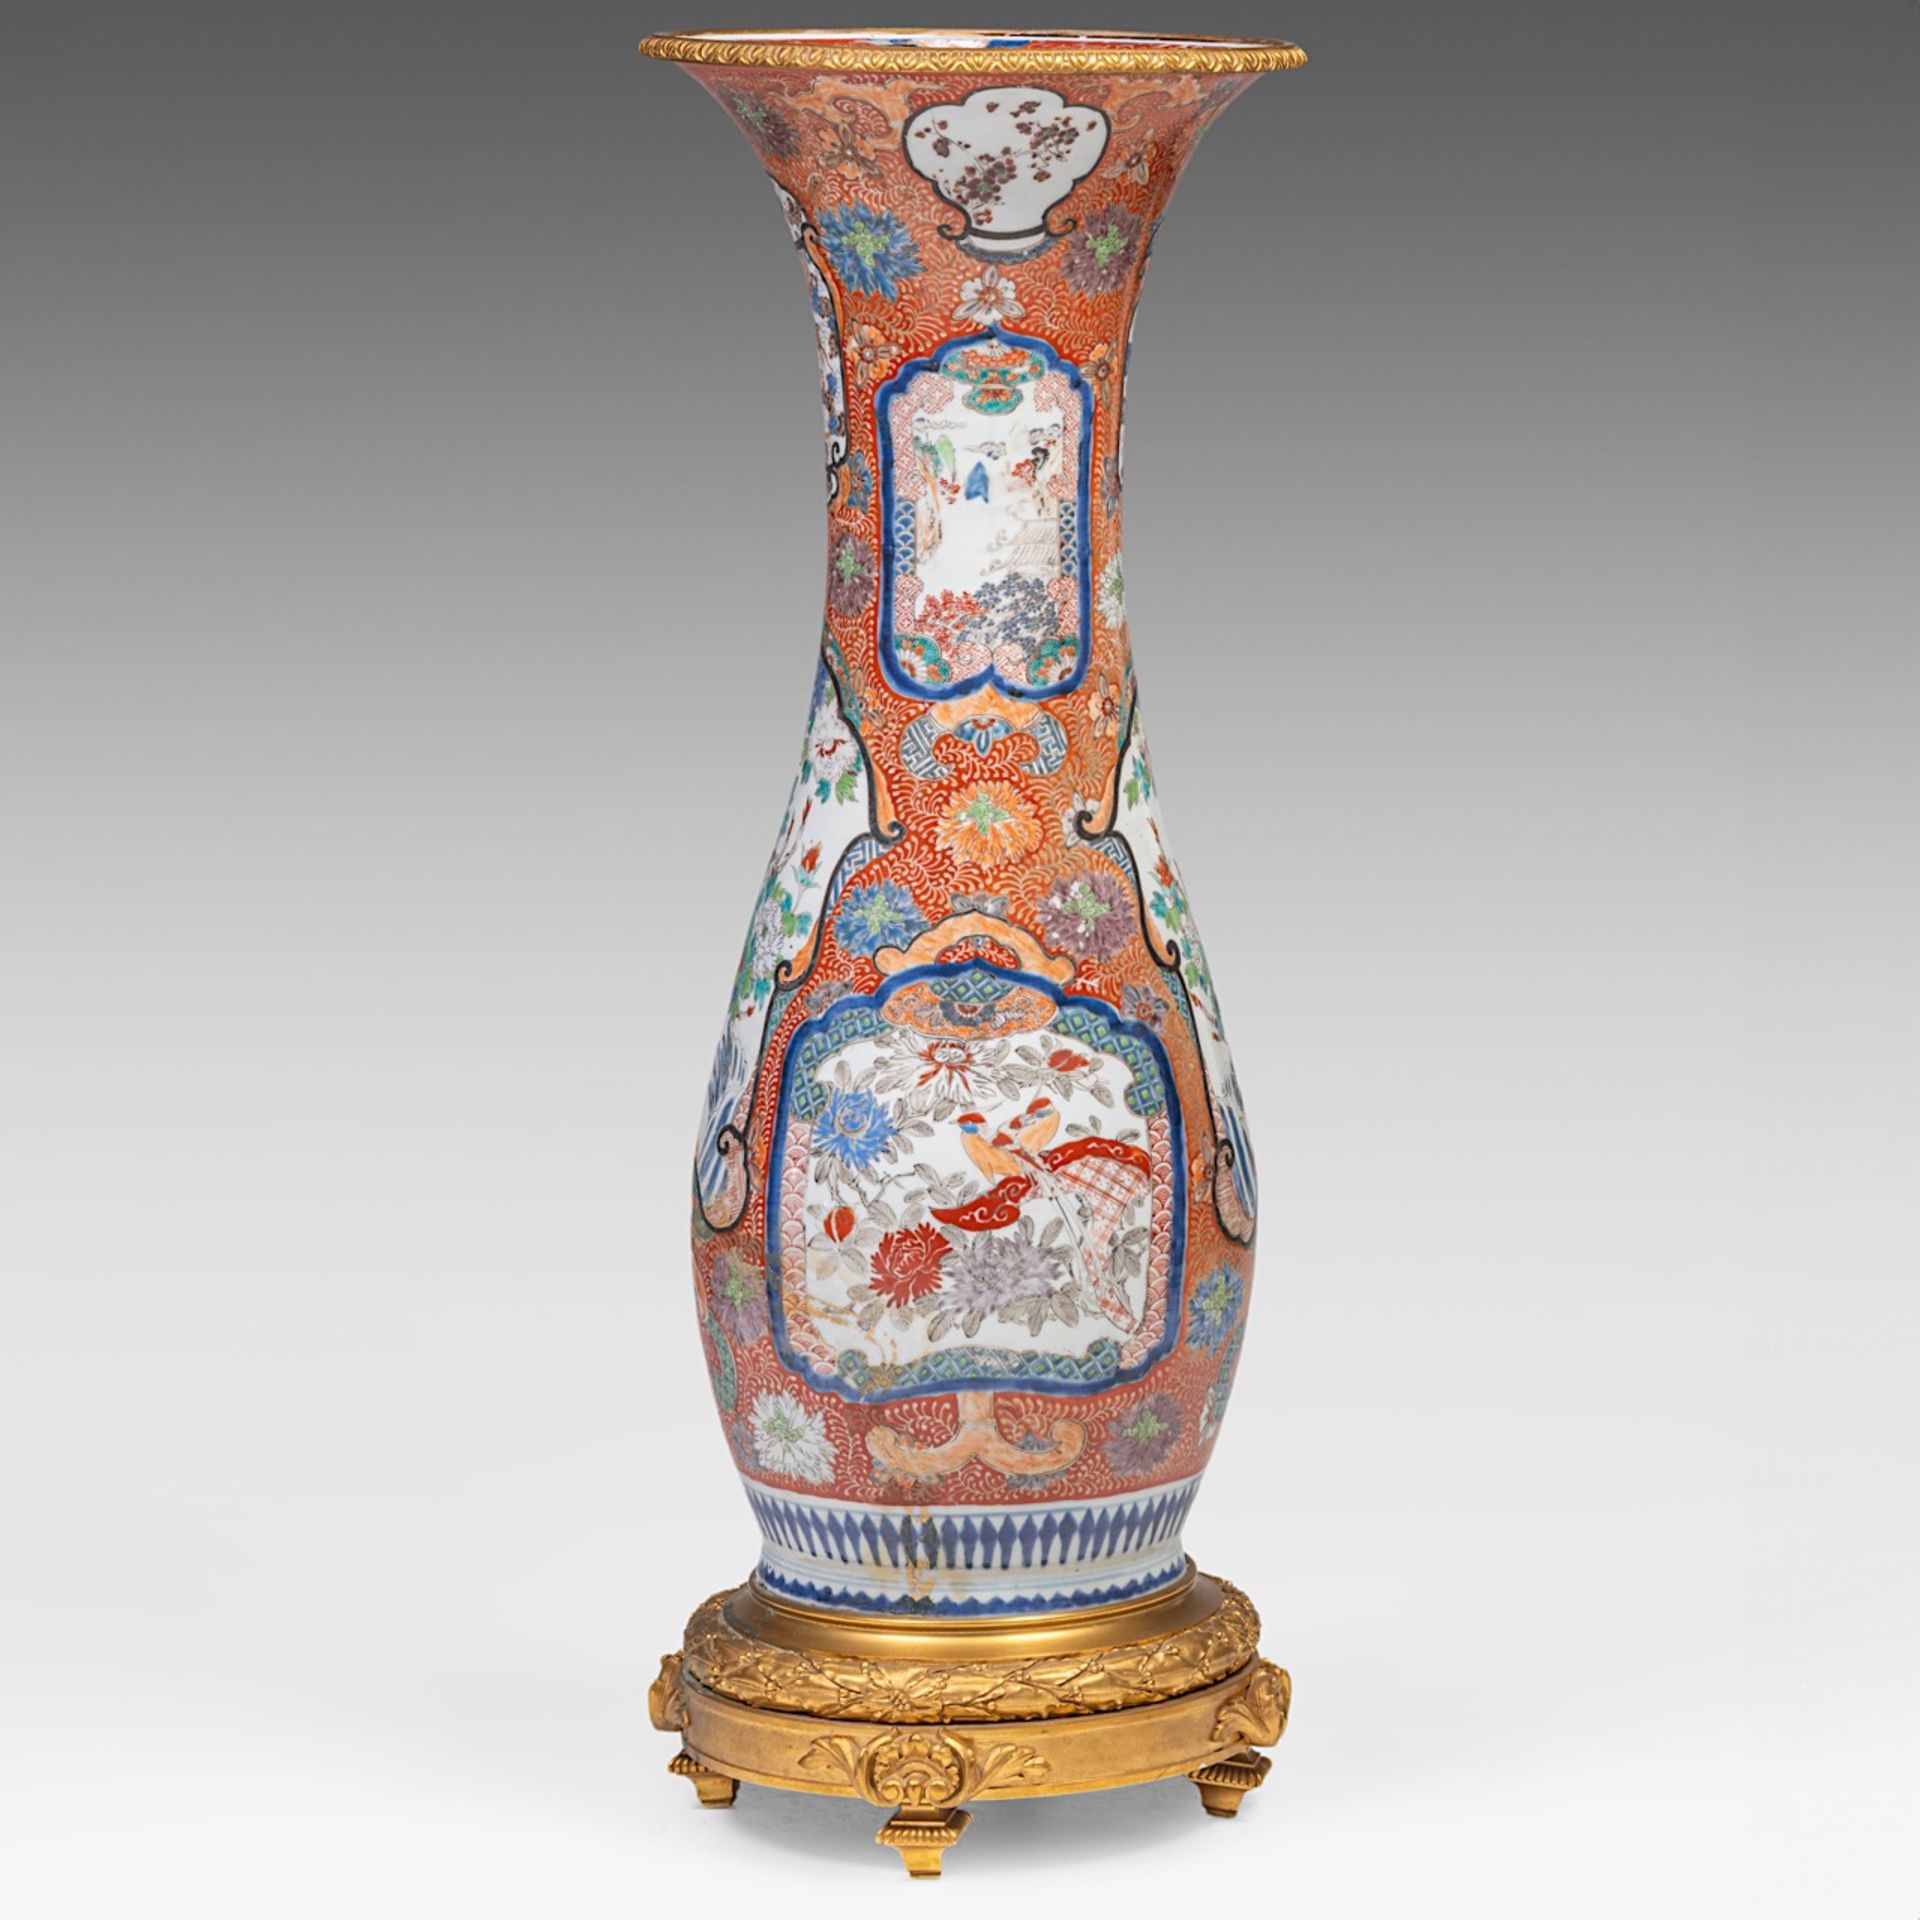 A large Japanese Imari vase, fixed on a gilt bronze foot and with a ditto rim, late Meiji (1868-1912